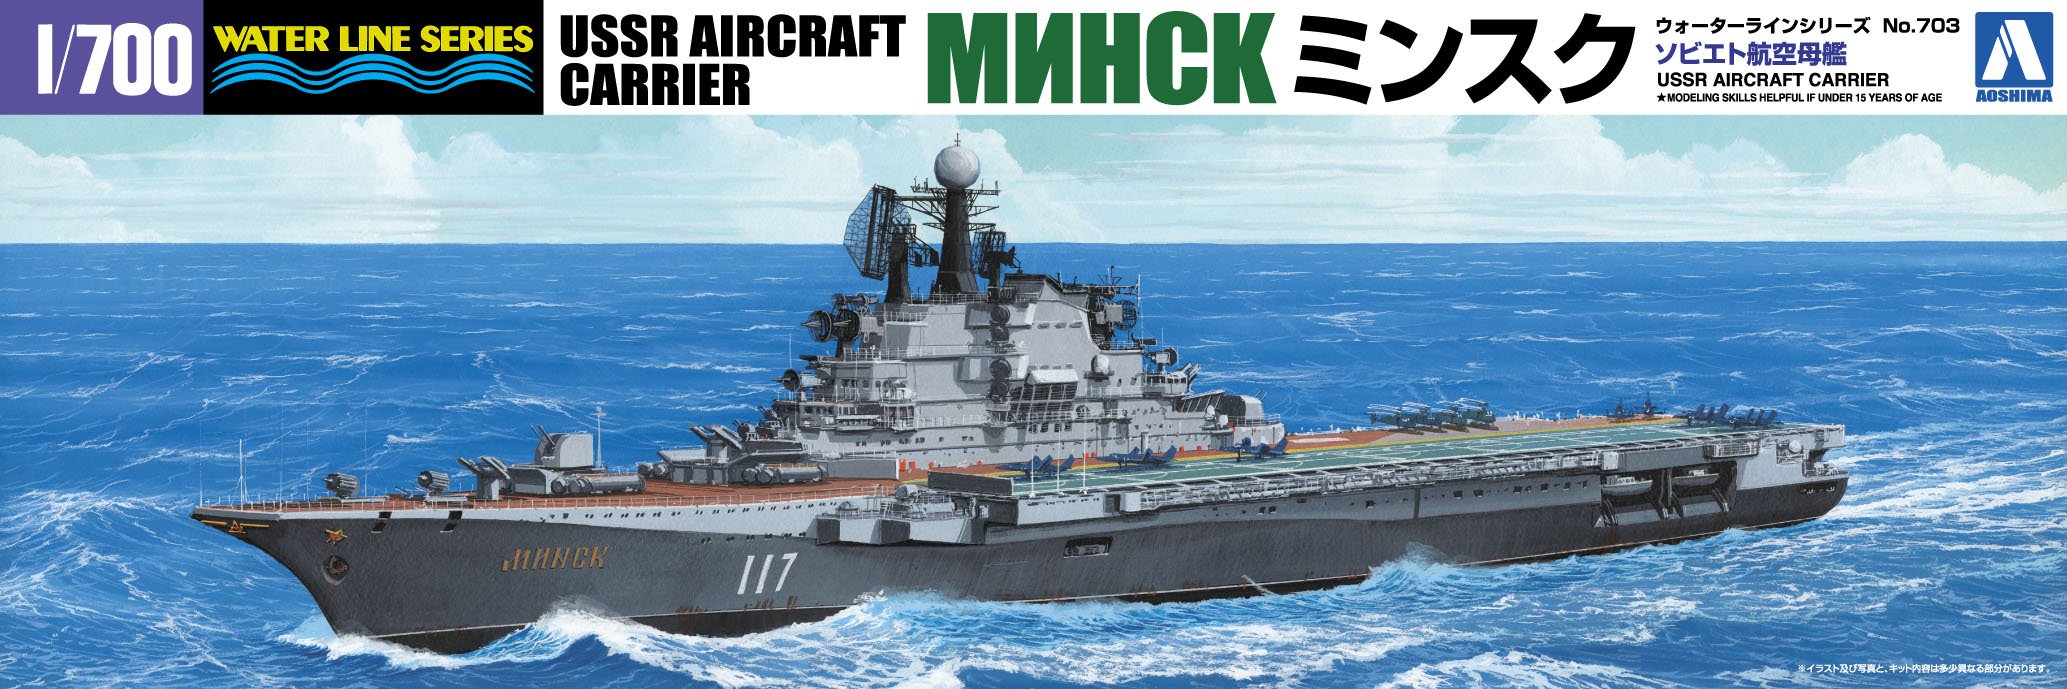 AOSHIMA Waterline 46043 Ussr Aircraft Carrier Minsk 1/700 Scale Kit